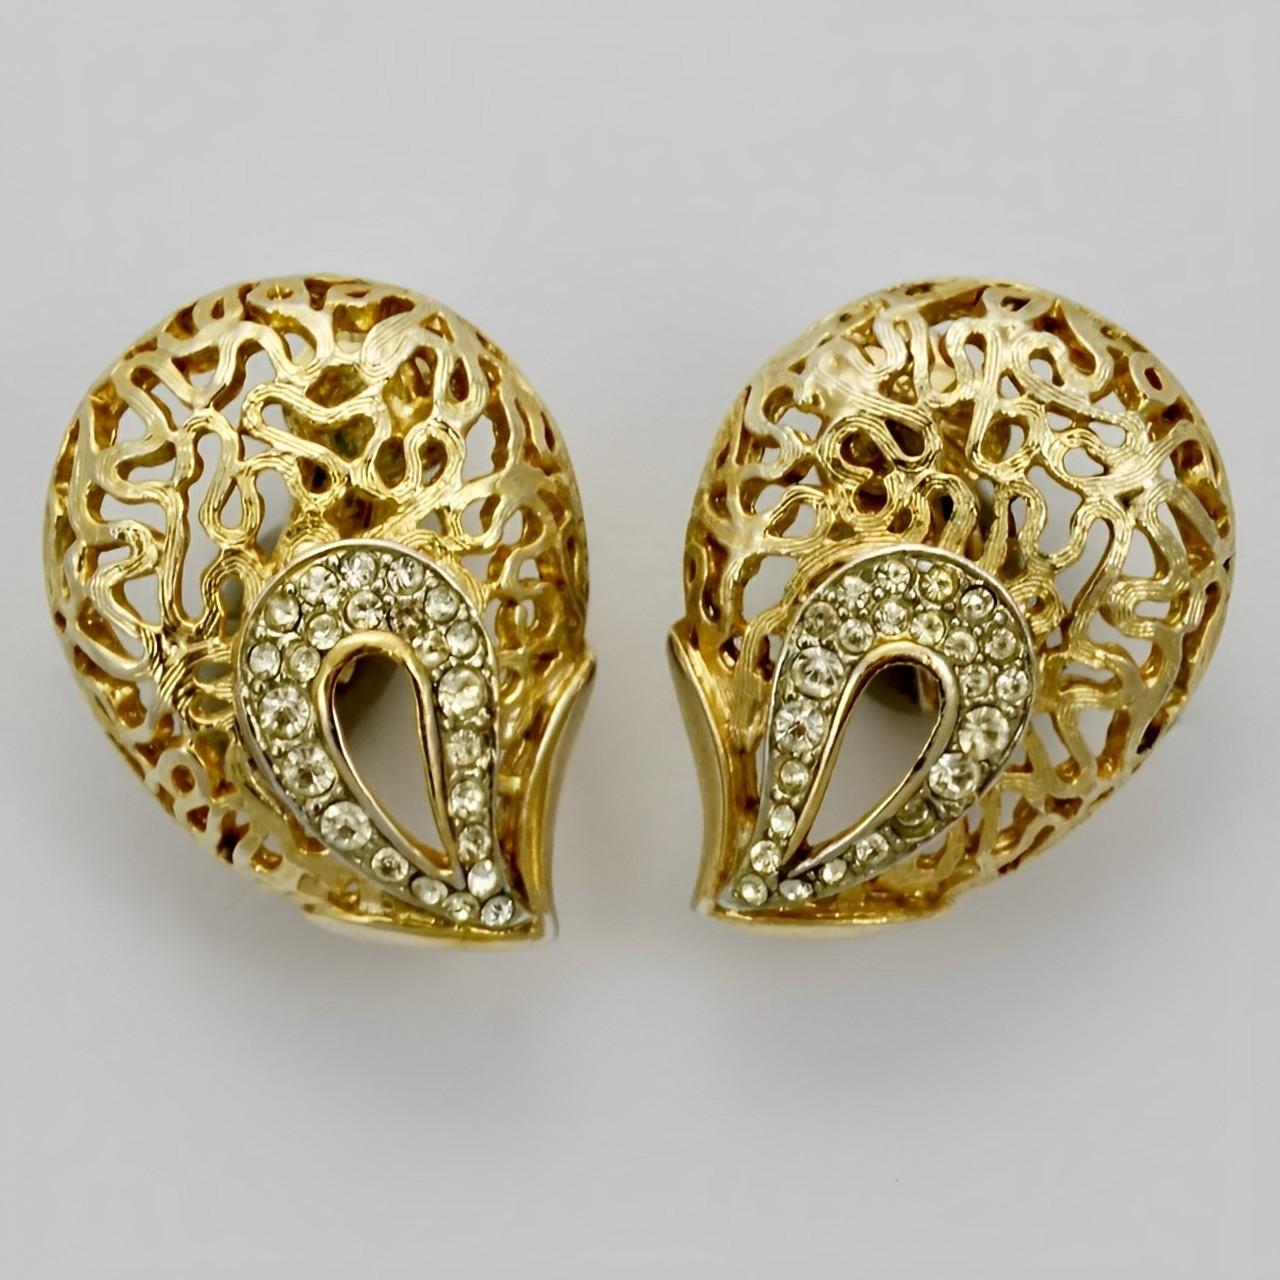 Jewelcraft gold plated textured brooch and clip on earrings, set with rhinestones. The brooch measures 5.4 cm / 2.1 inches by 4.3 cm / 1.7 inches. The earrings are 2.7 cm / 1 inch by 2 cm / .78 inch. There is some wear to the gold plating, and some